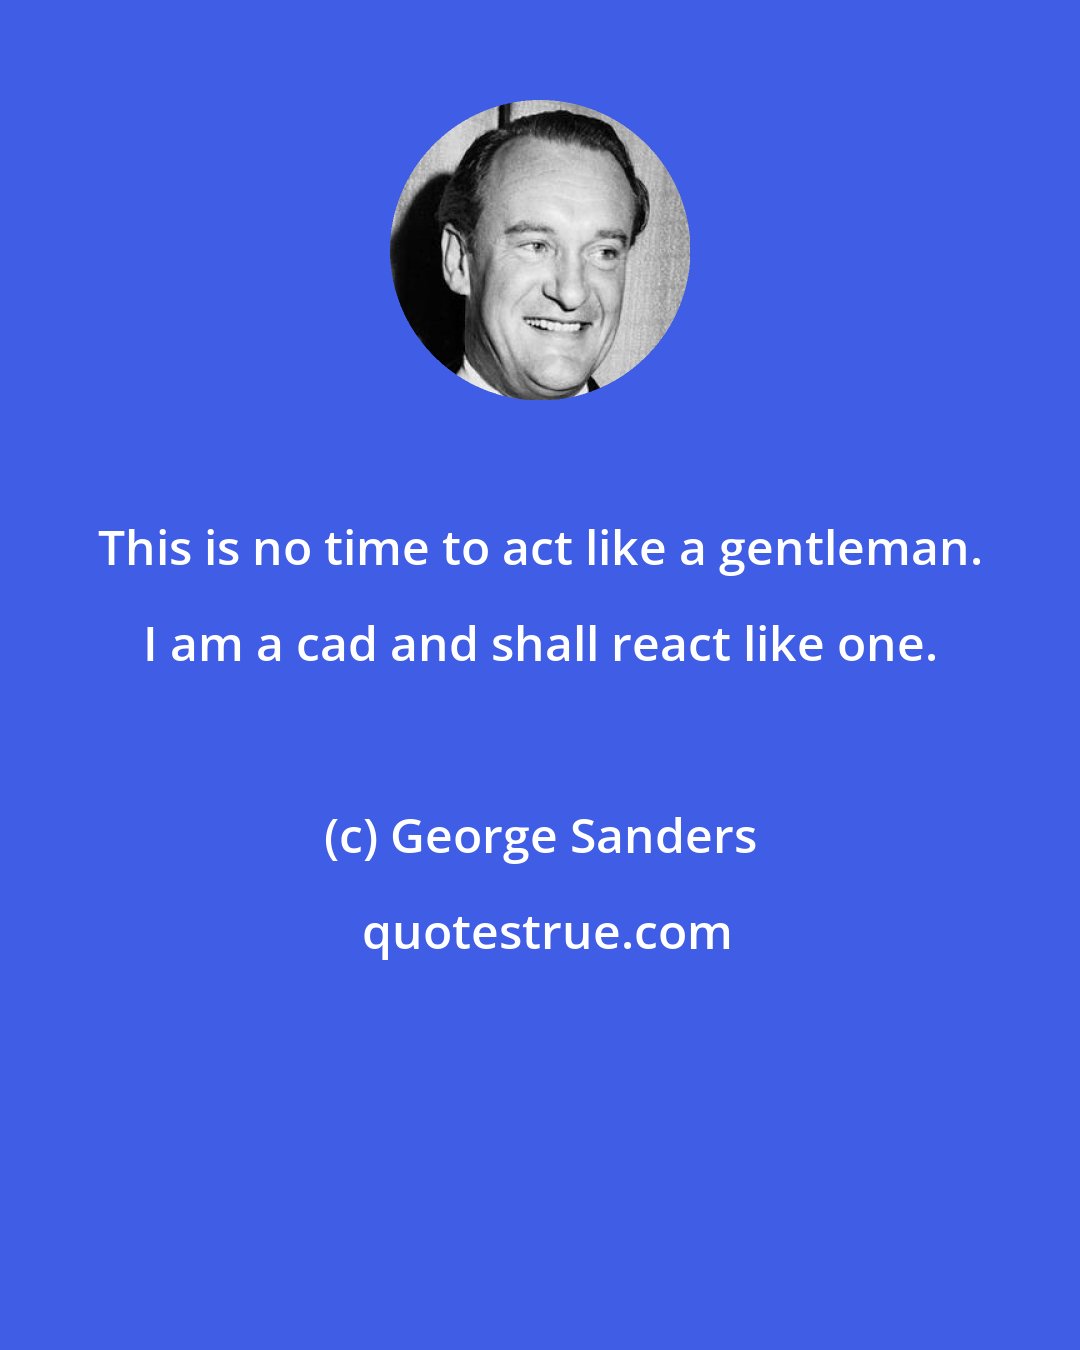 George Sanders: This is no time to act like a gentleman. I am a cad and shall react like one.